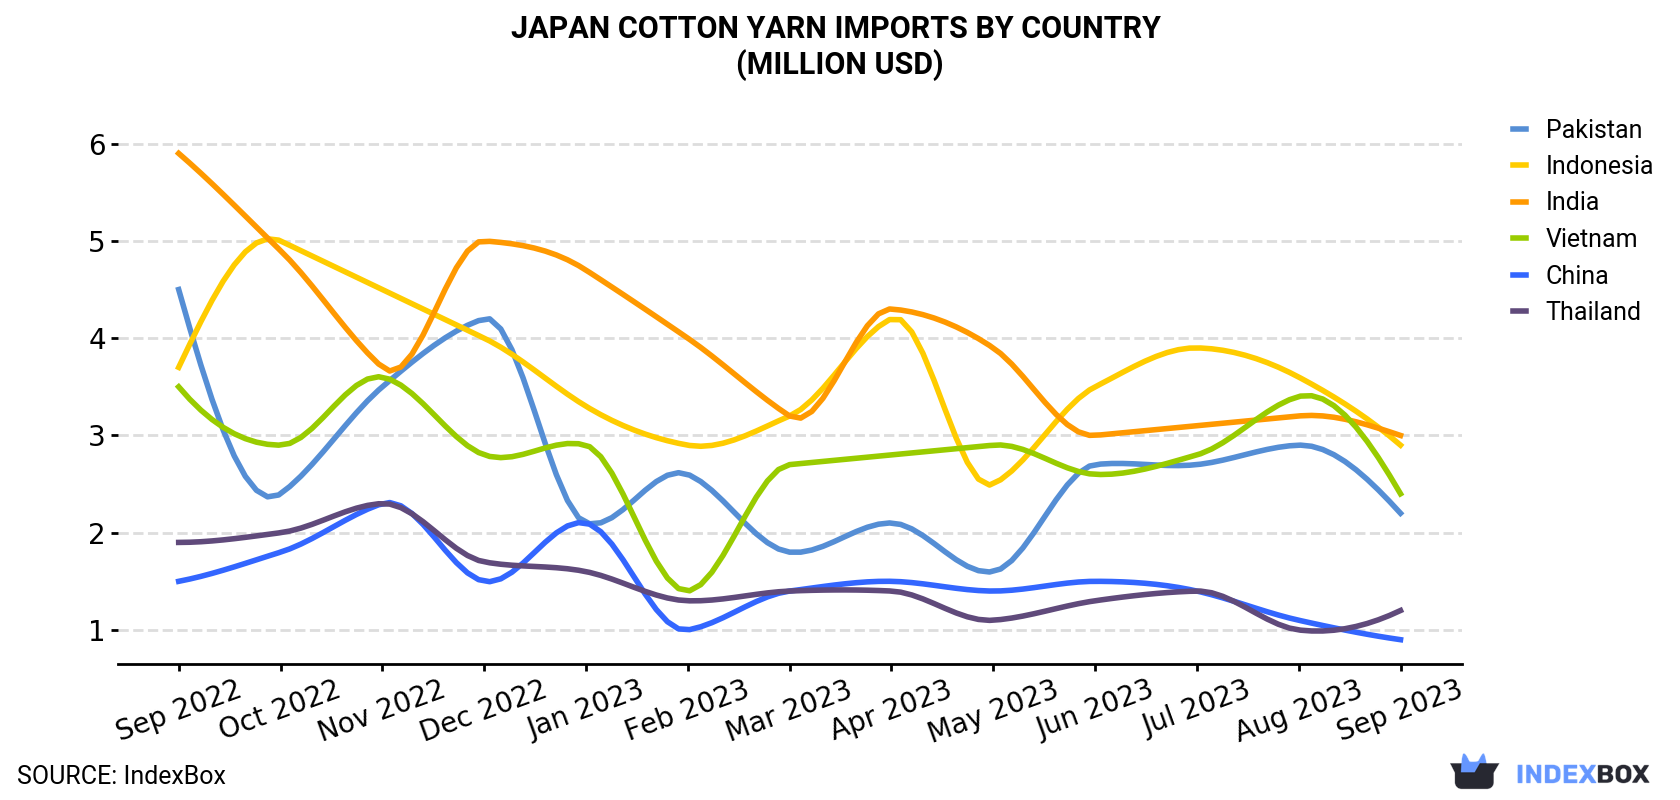 Japan Cotton Yarn Imports By Country (Million USD)